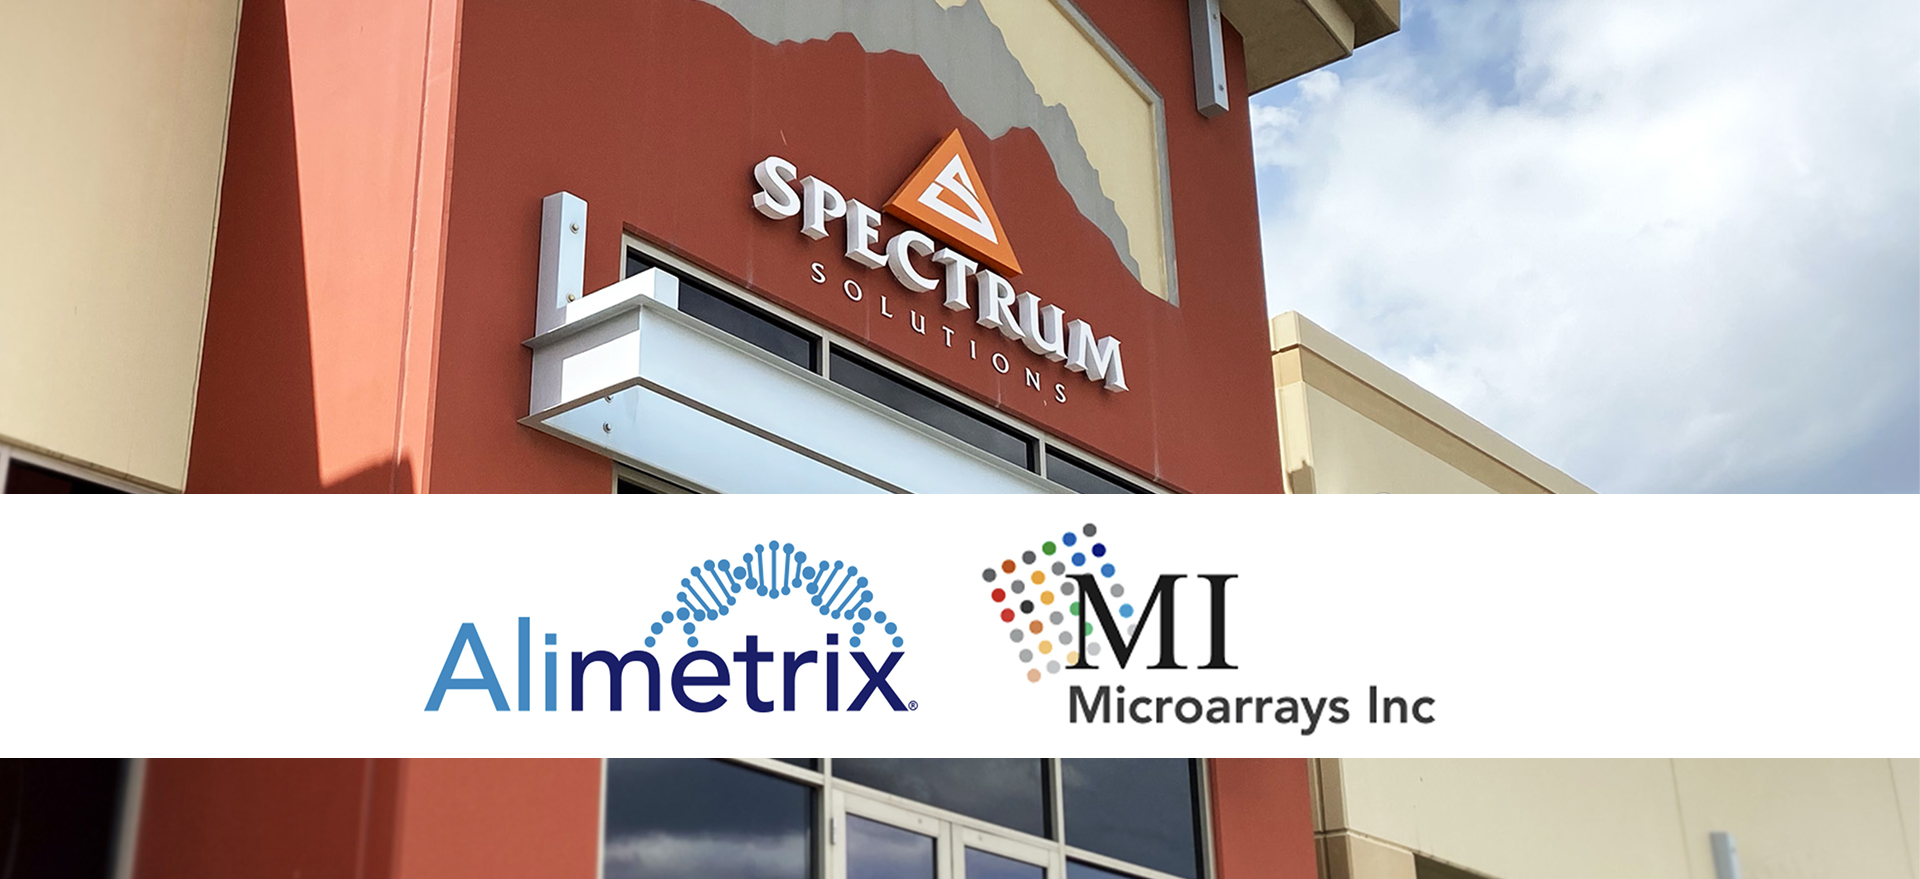 Spectrum Solutions Acquires Alimetrix and Microarrays